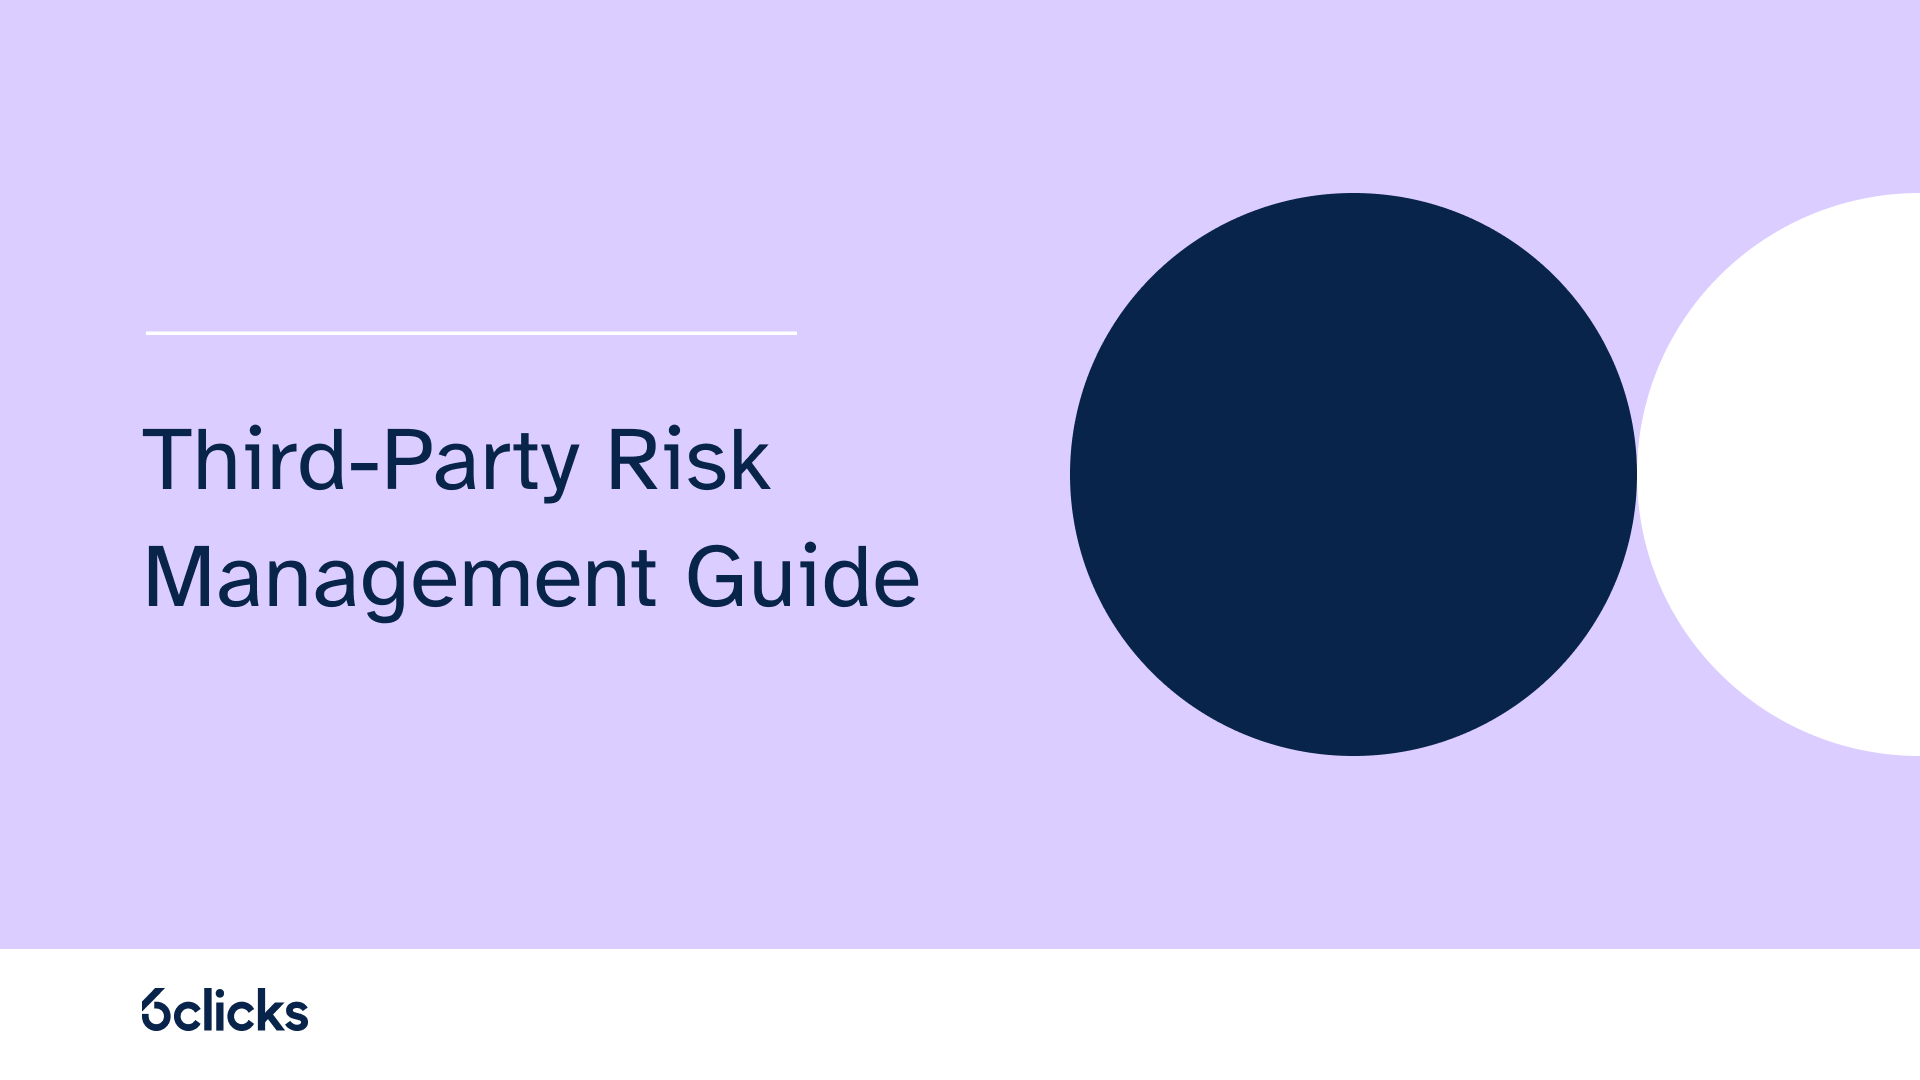 Third-Party Risk Management Guide